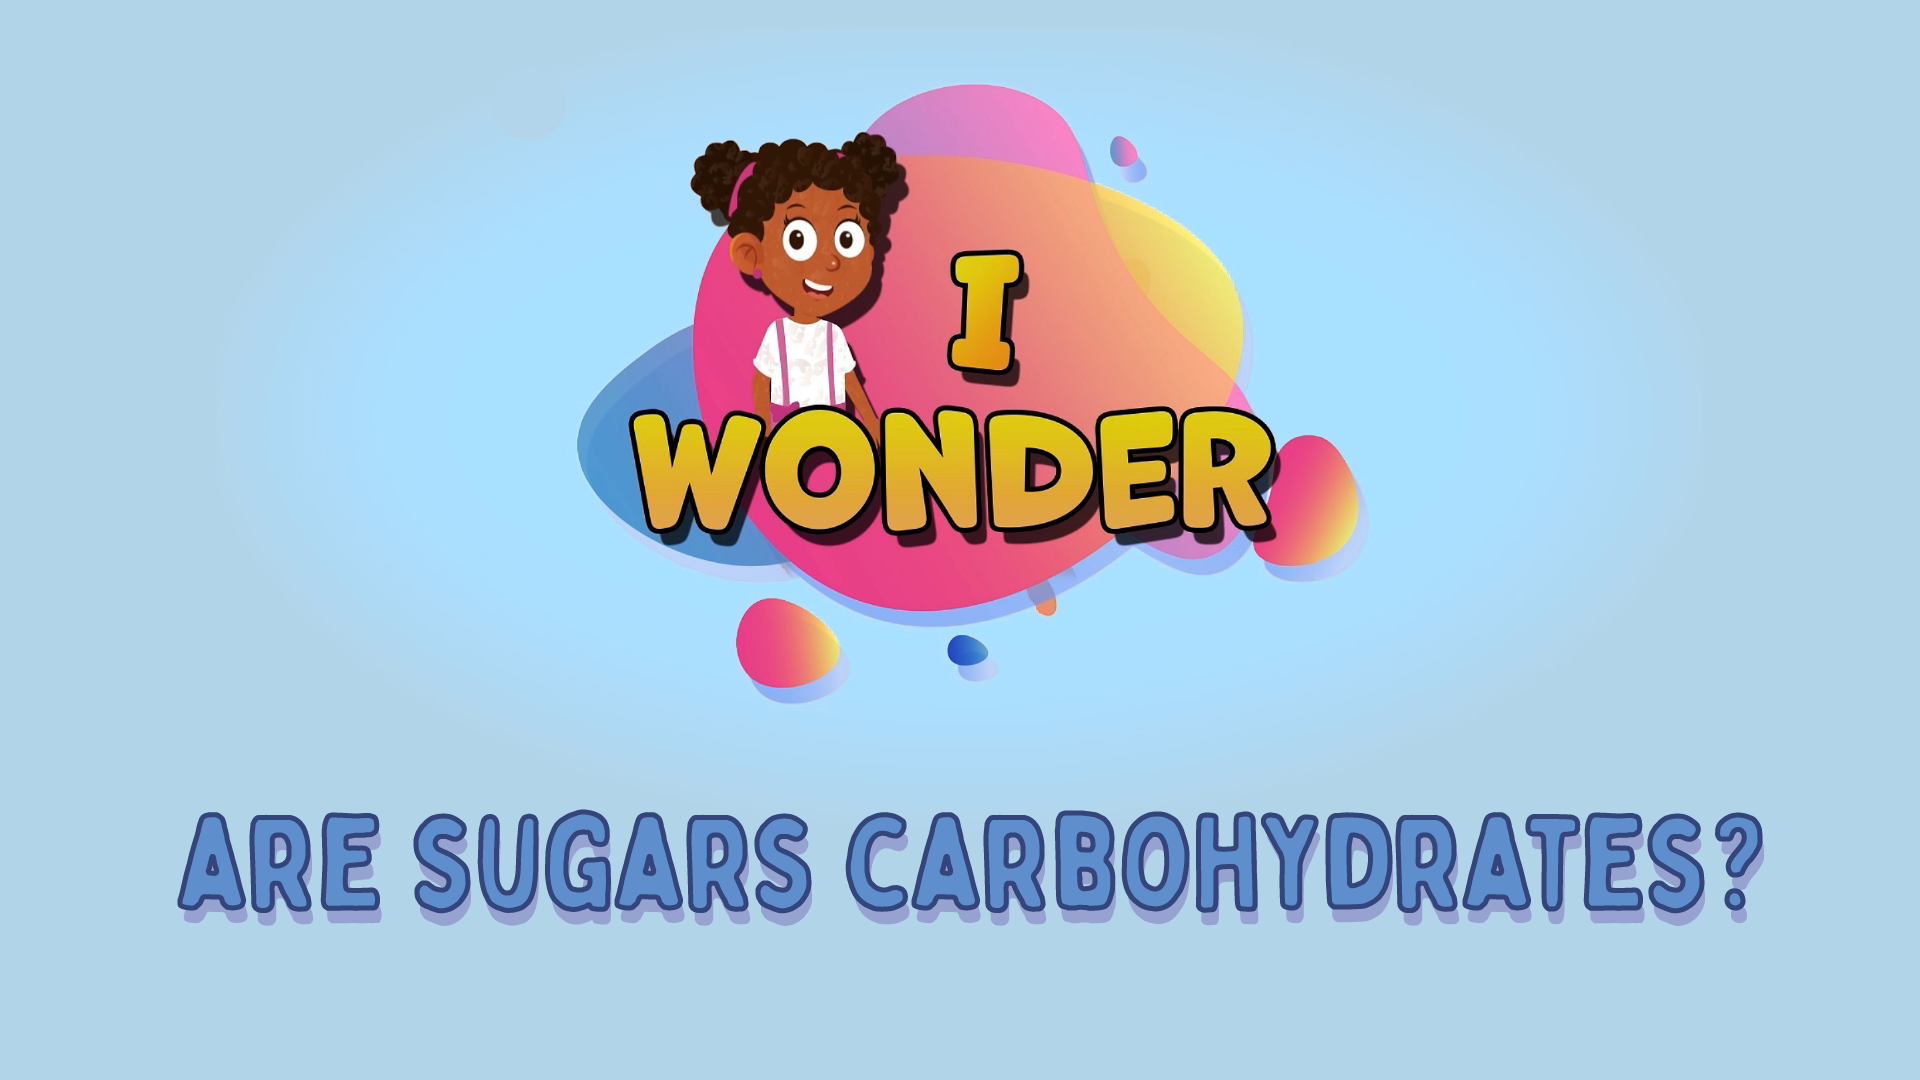 Are Sugars Carbohydrates?